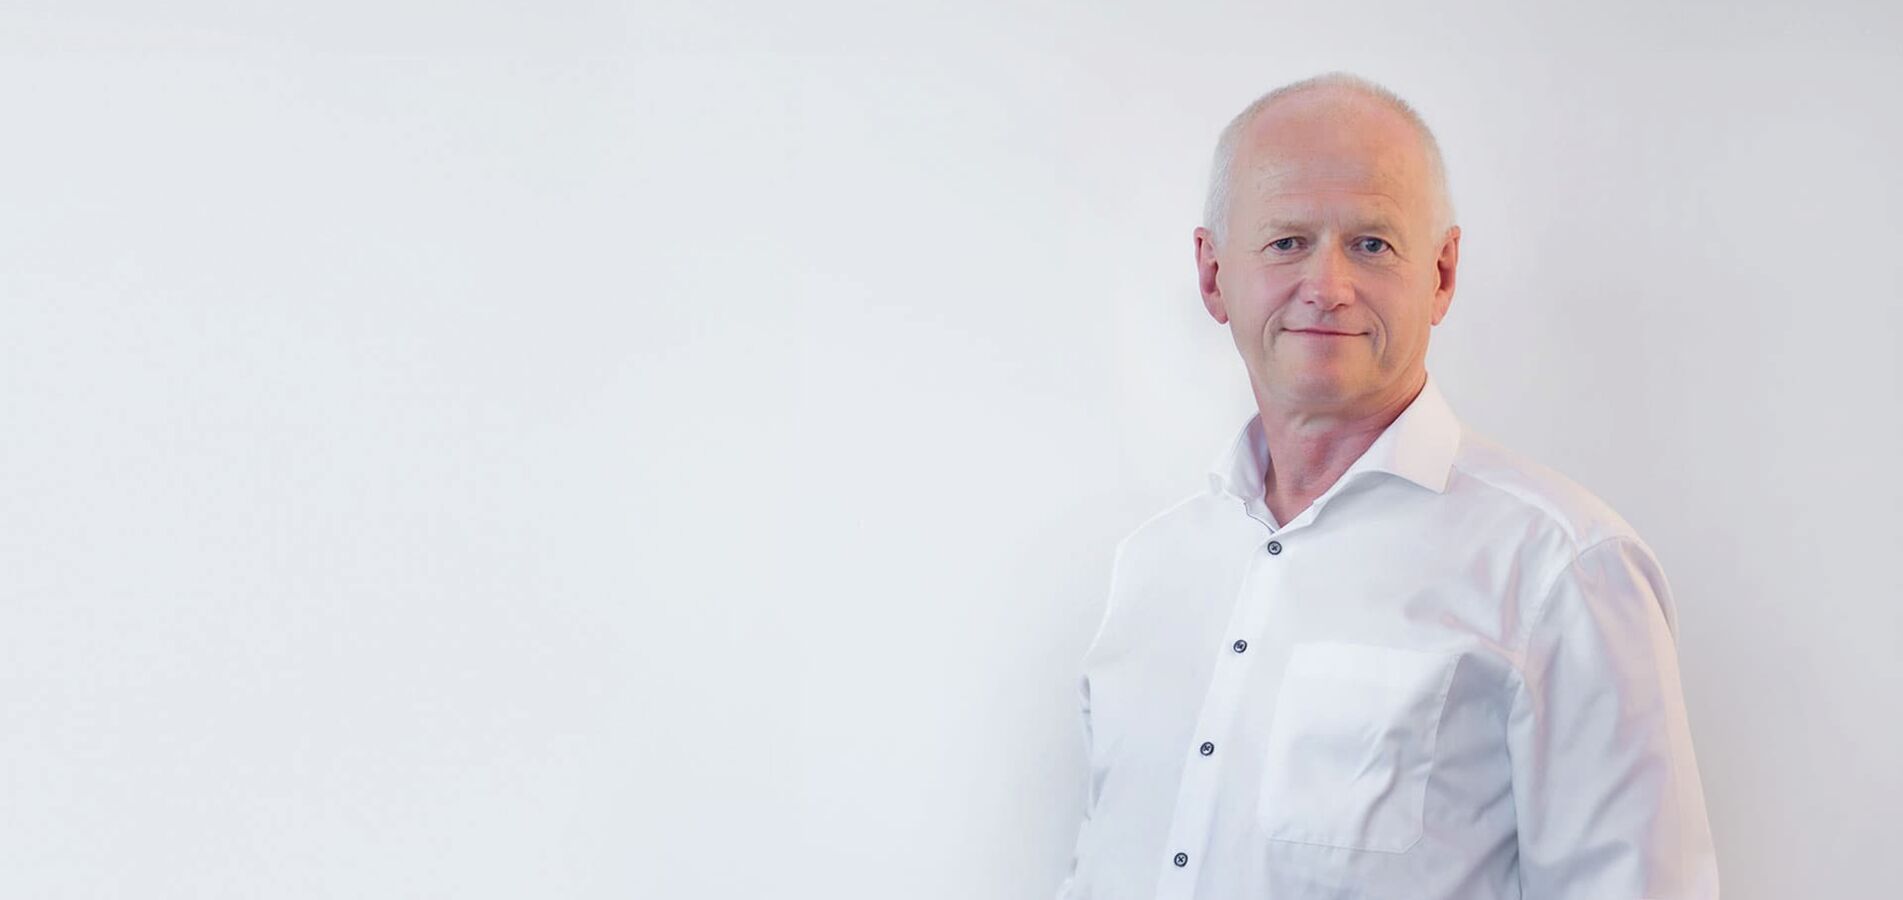 A portrait photo of the managing director Arno Schlösser of DP-Dock. He stands in front of a light gray wall and wears a white shirt.